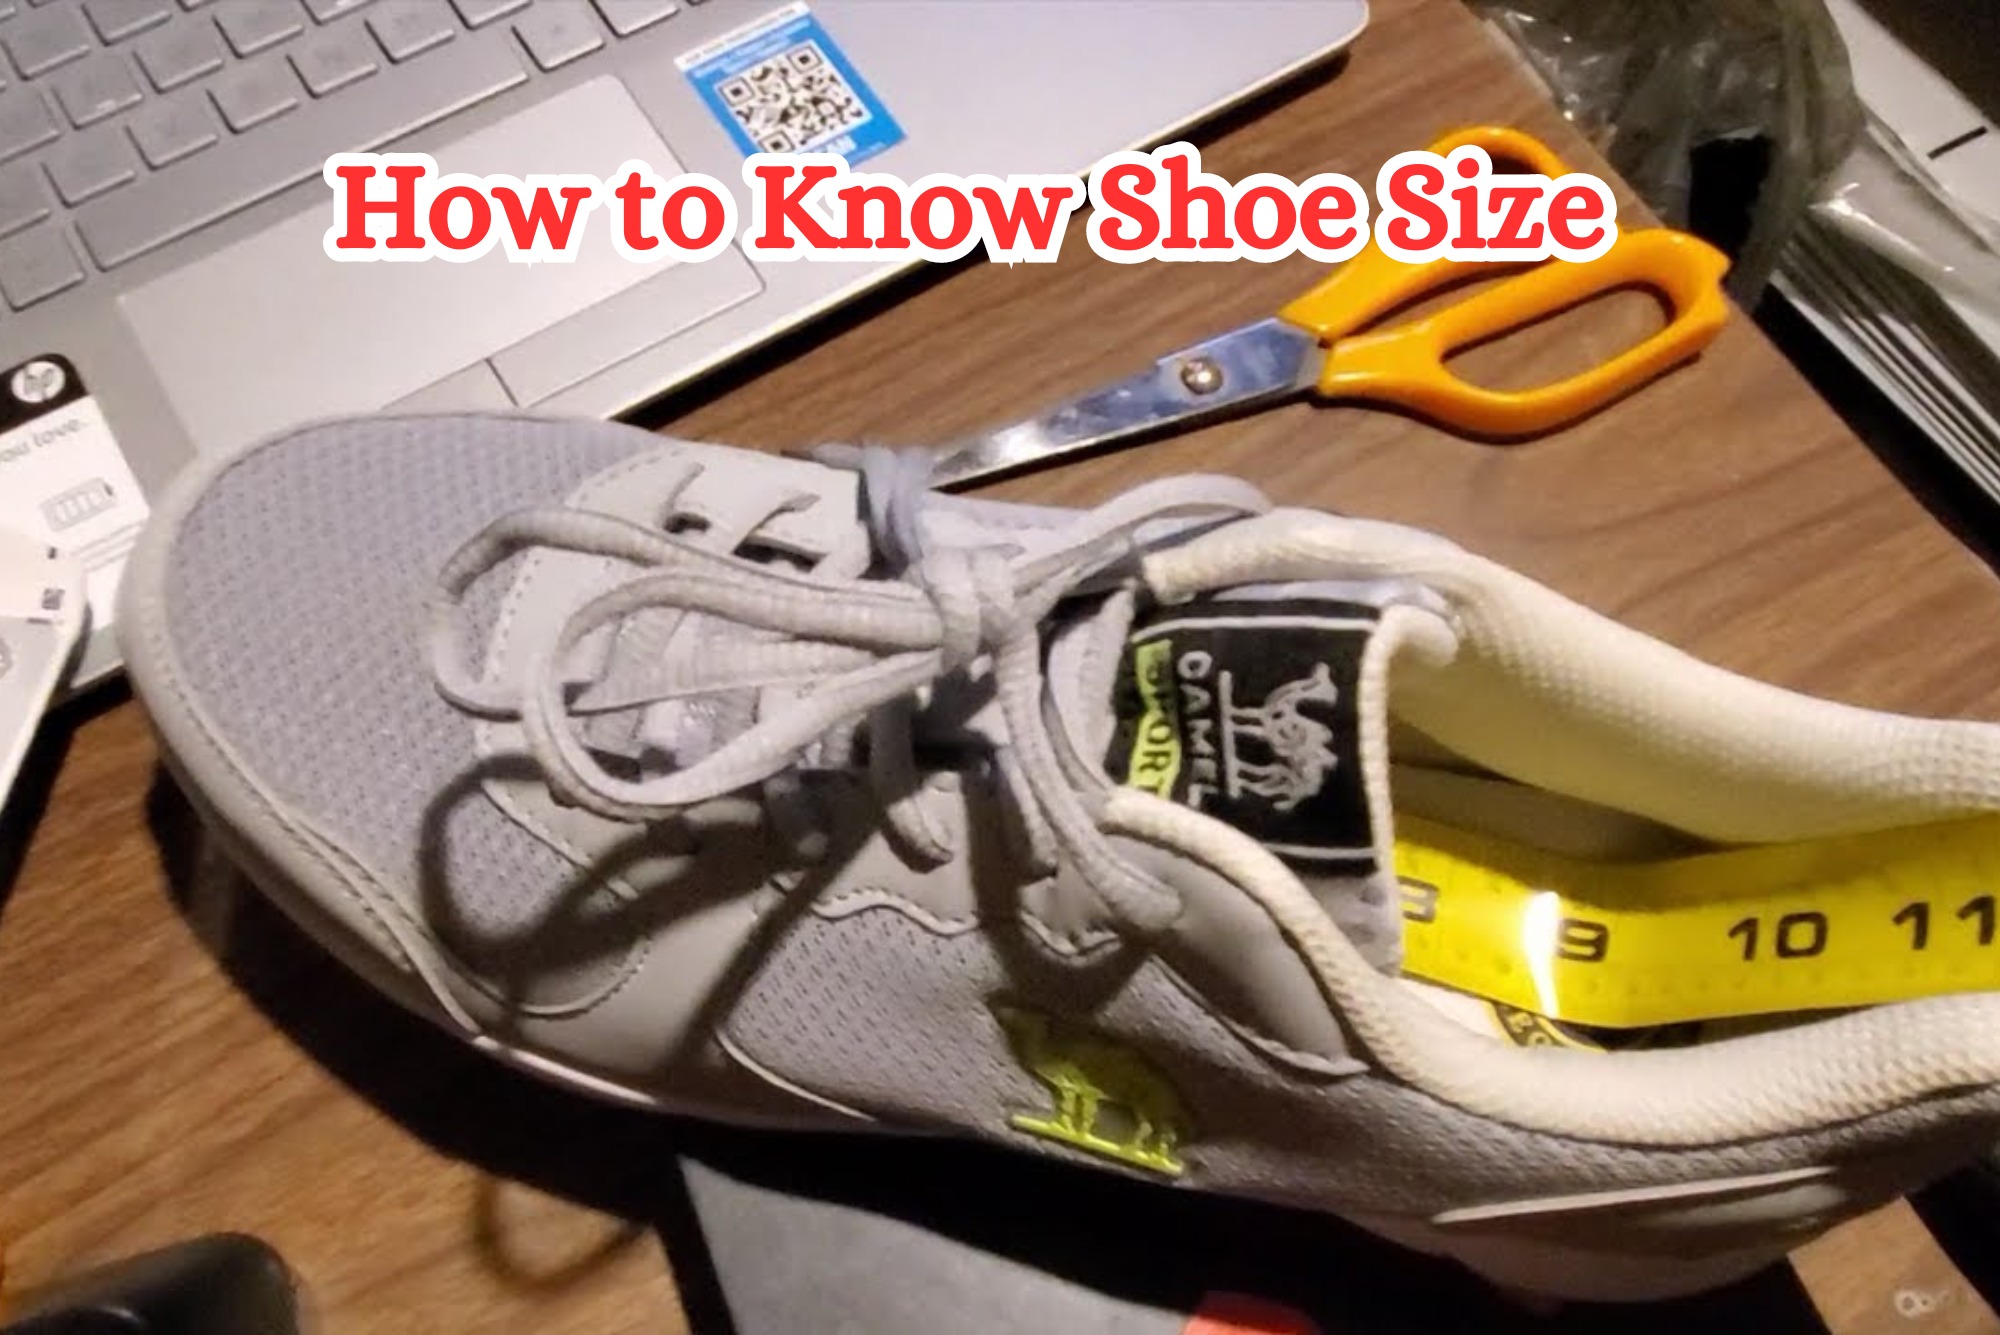 How to Know Shoe Size